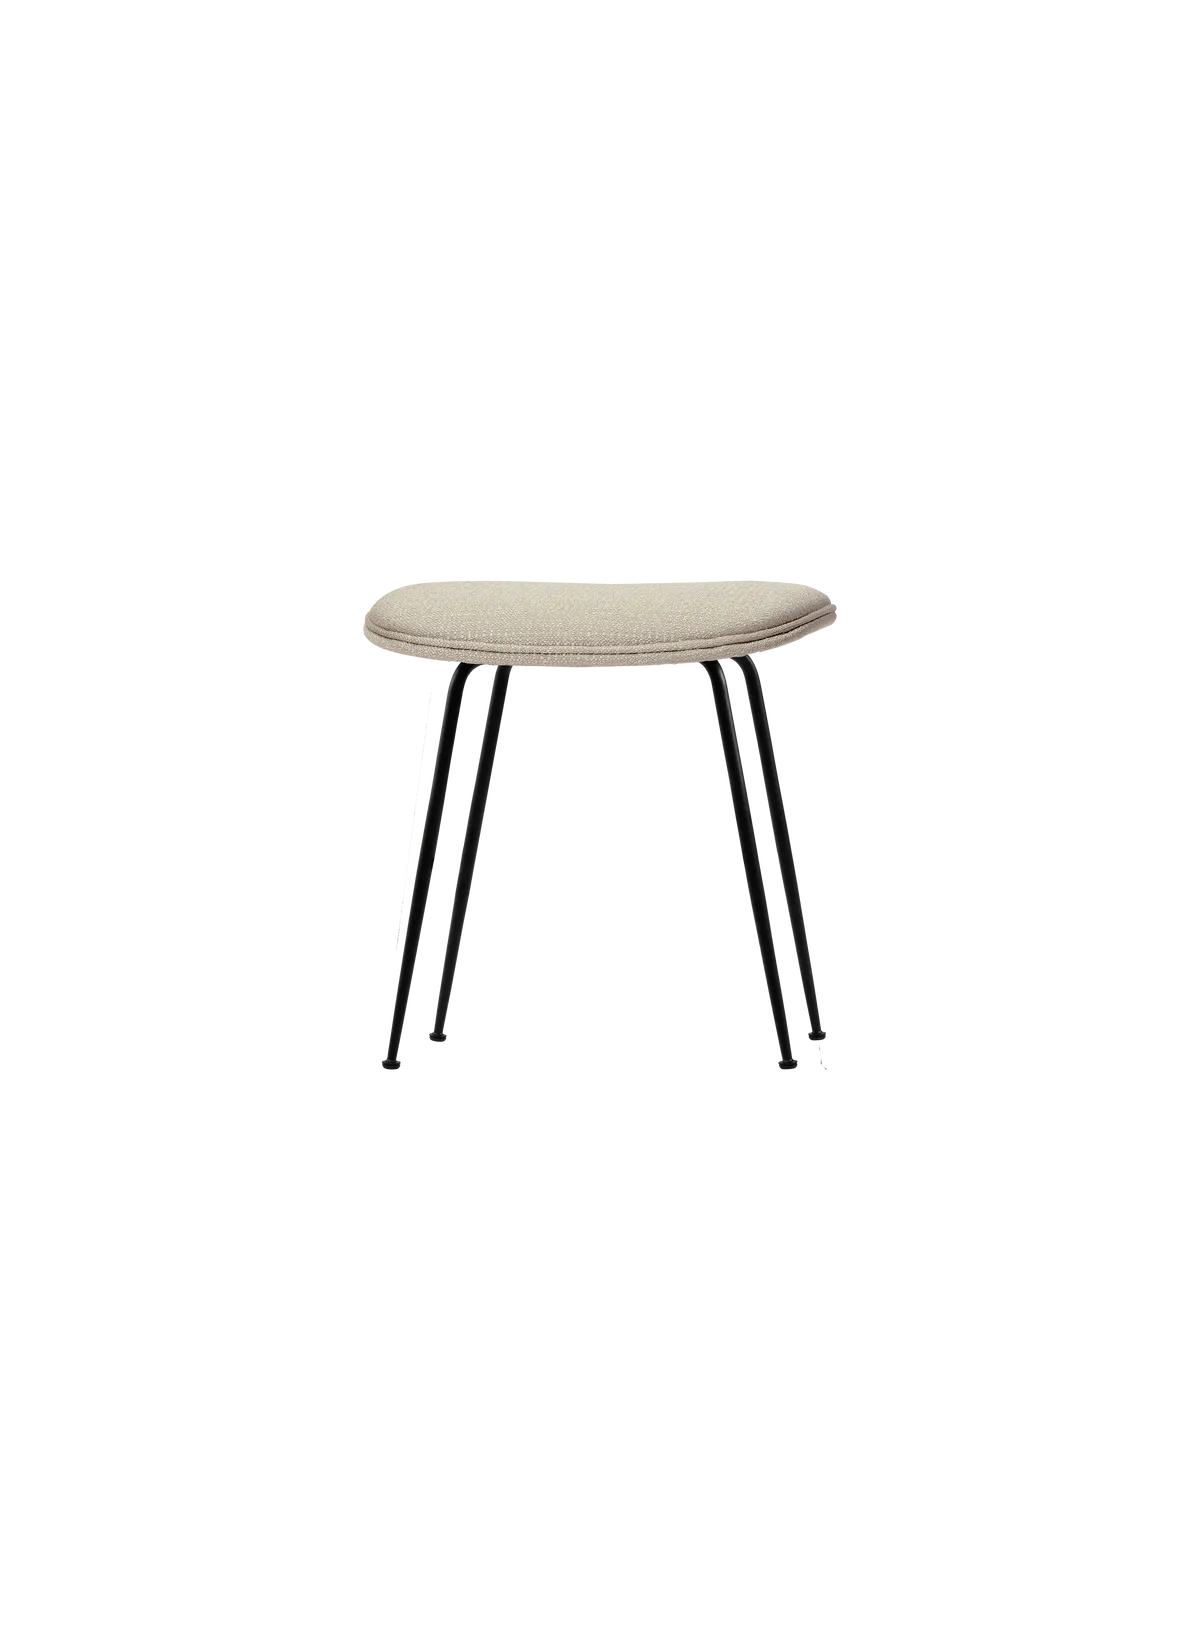 Beetle Stool - Fully Upholstered - Conic Base by Gubi